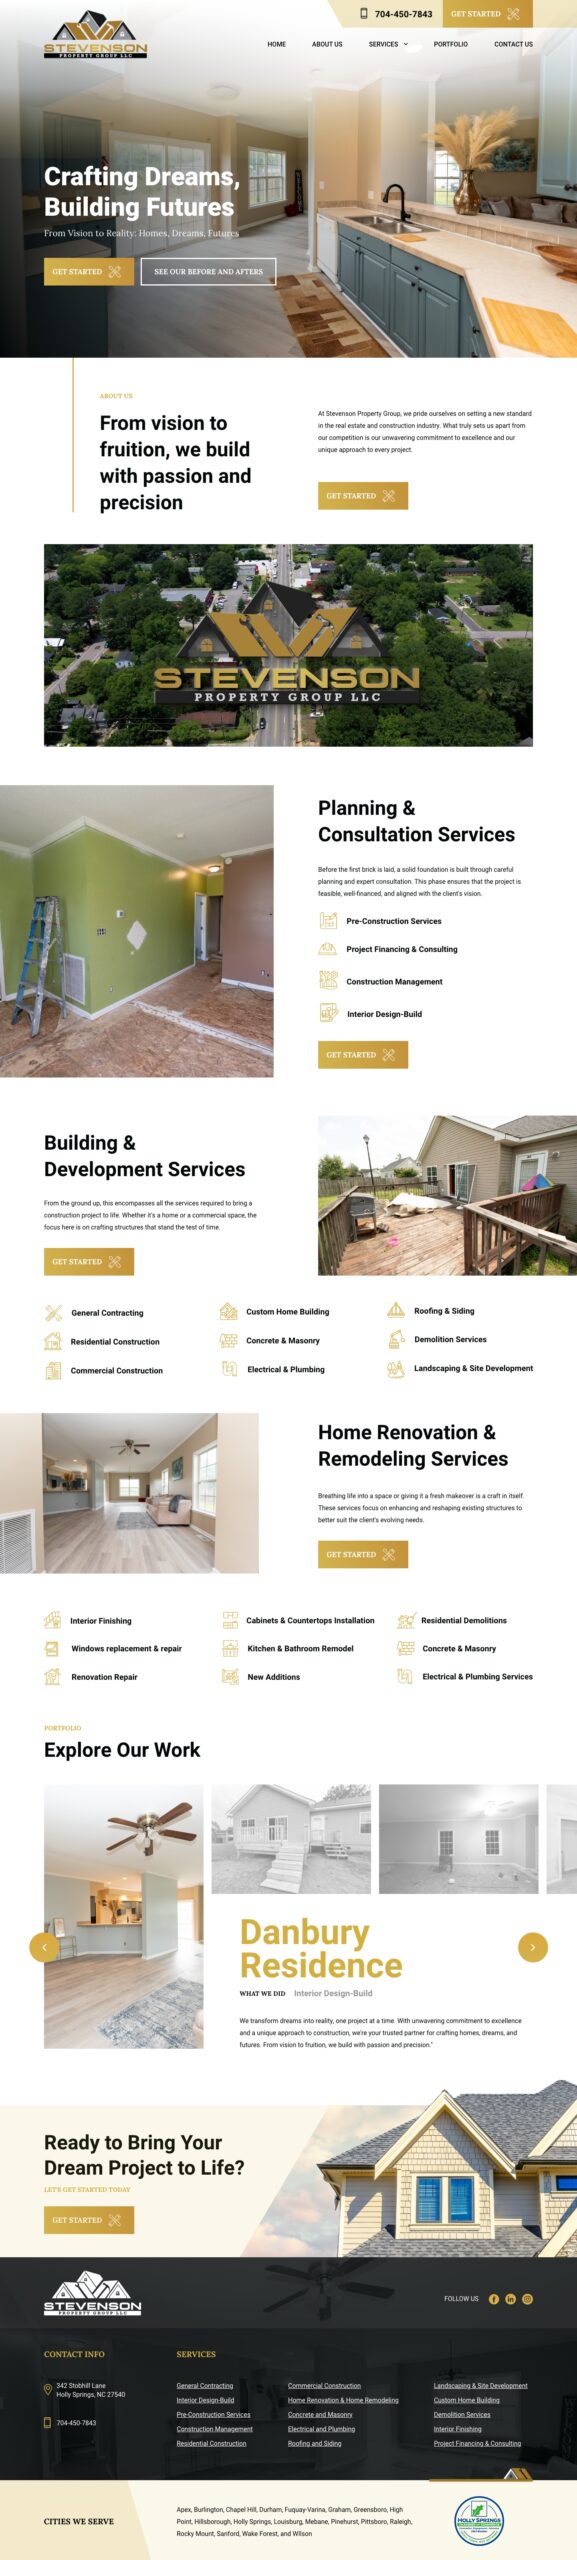 Raleigh Web Design Home Remodeling Company Stevenson Property Group Home